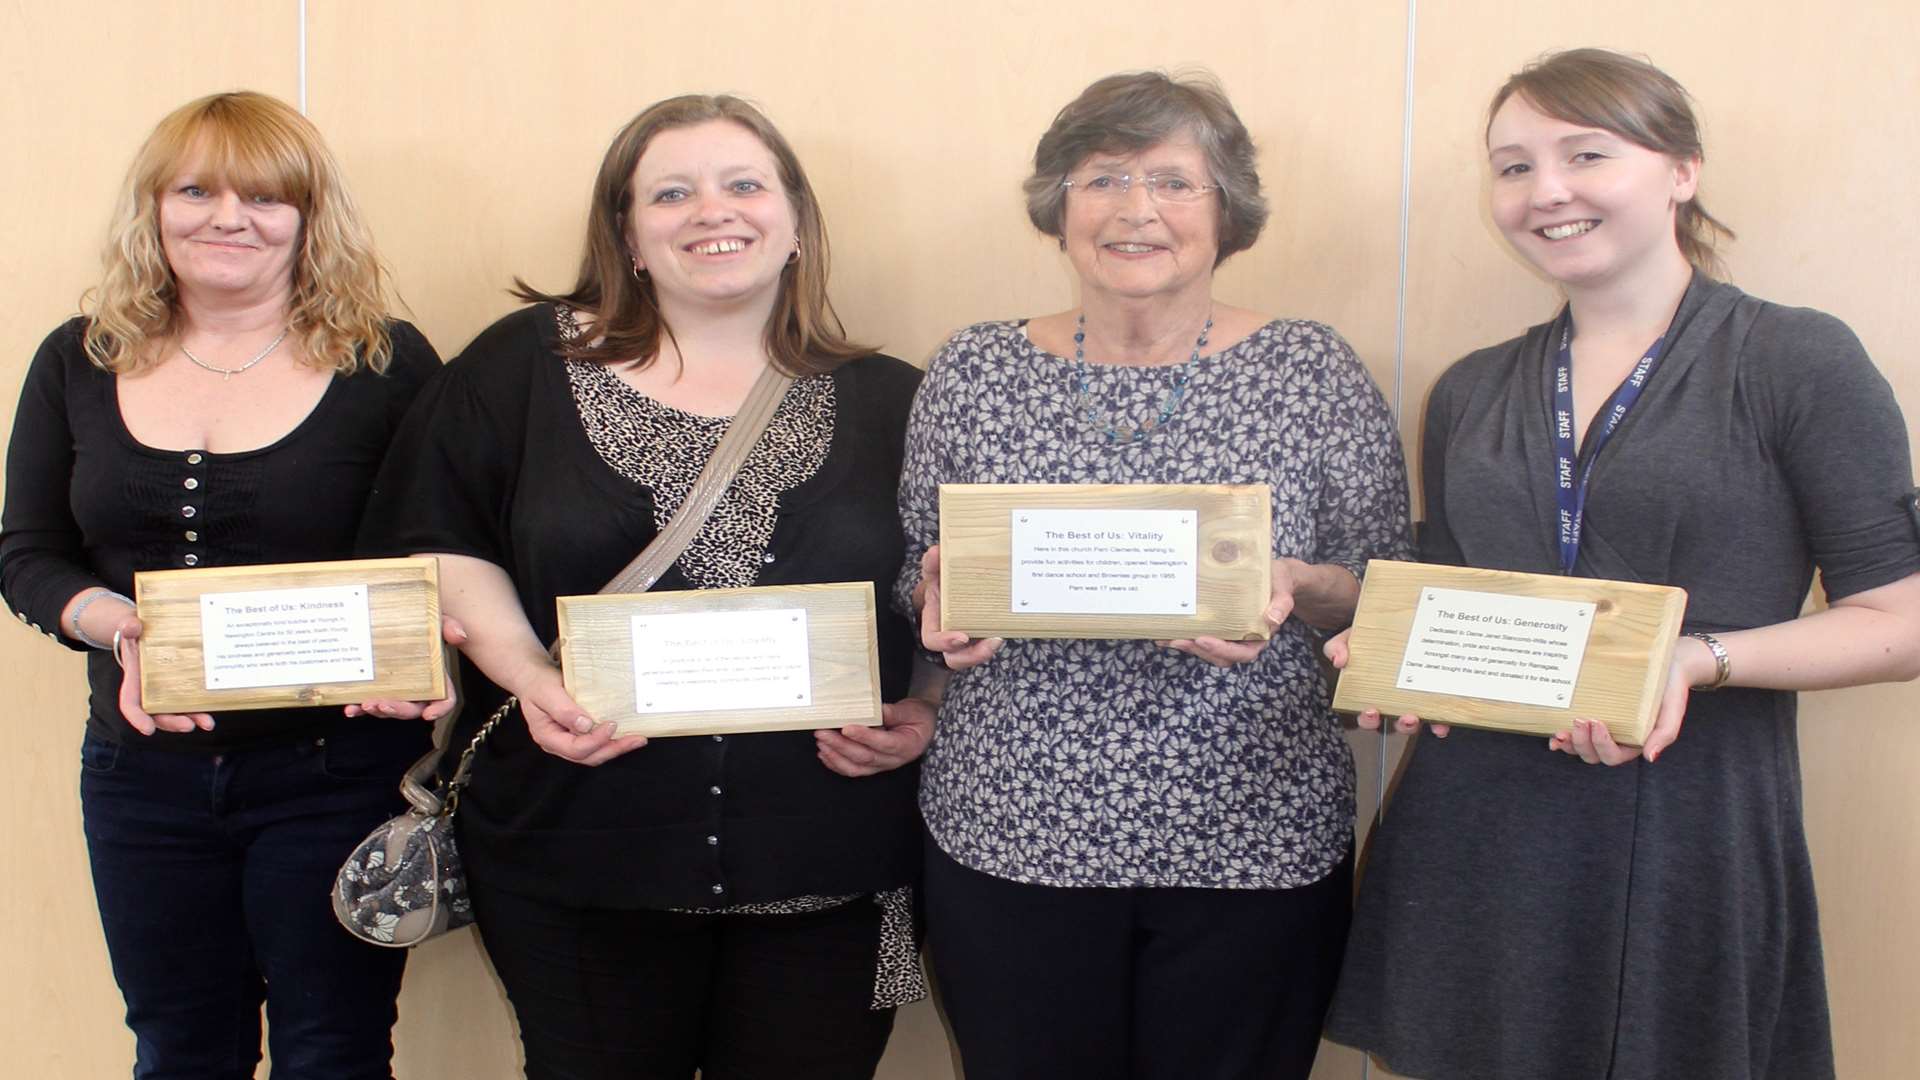 Jill Snowdon, Marie Thomas, Pam Bellingham and Elise Howard holding the plaques